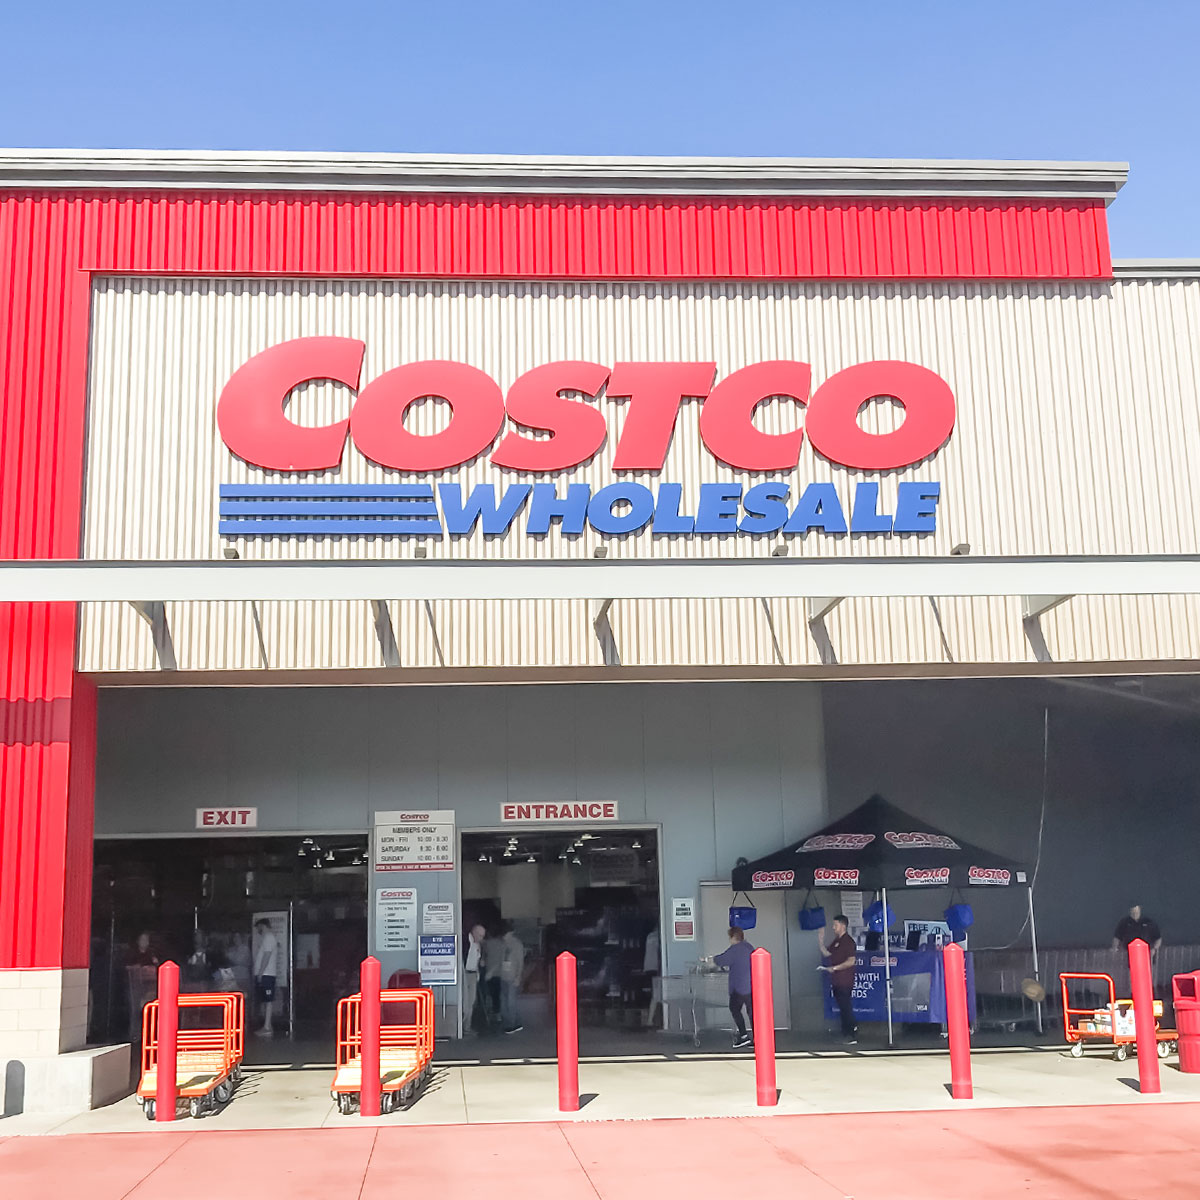 I would rate the sushi 2 out of 10 : r/Costco